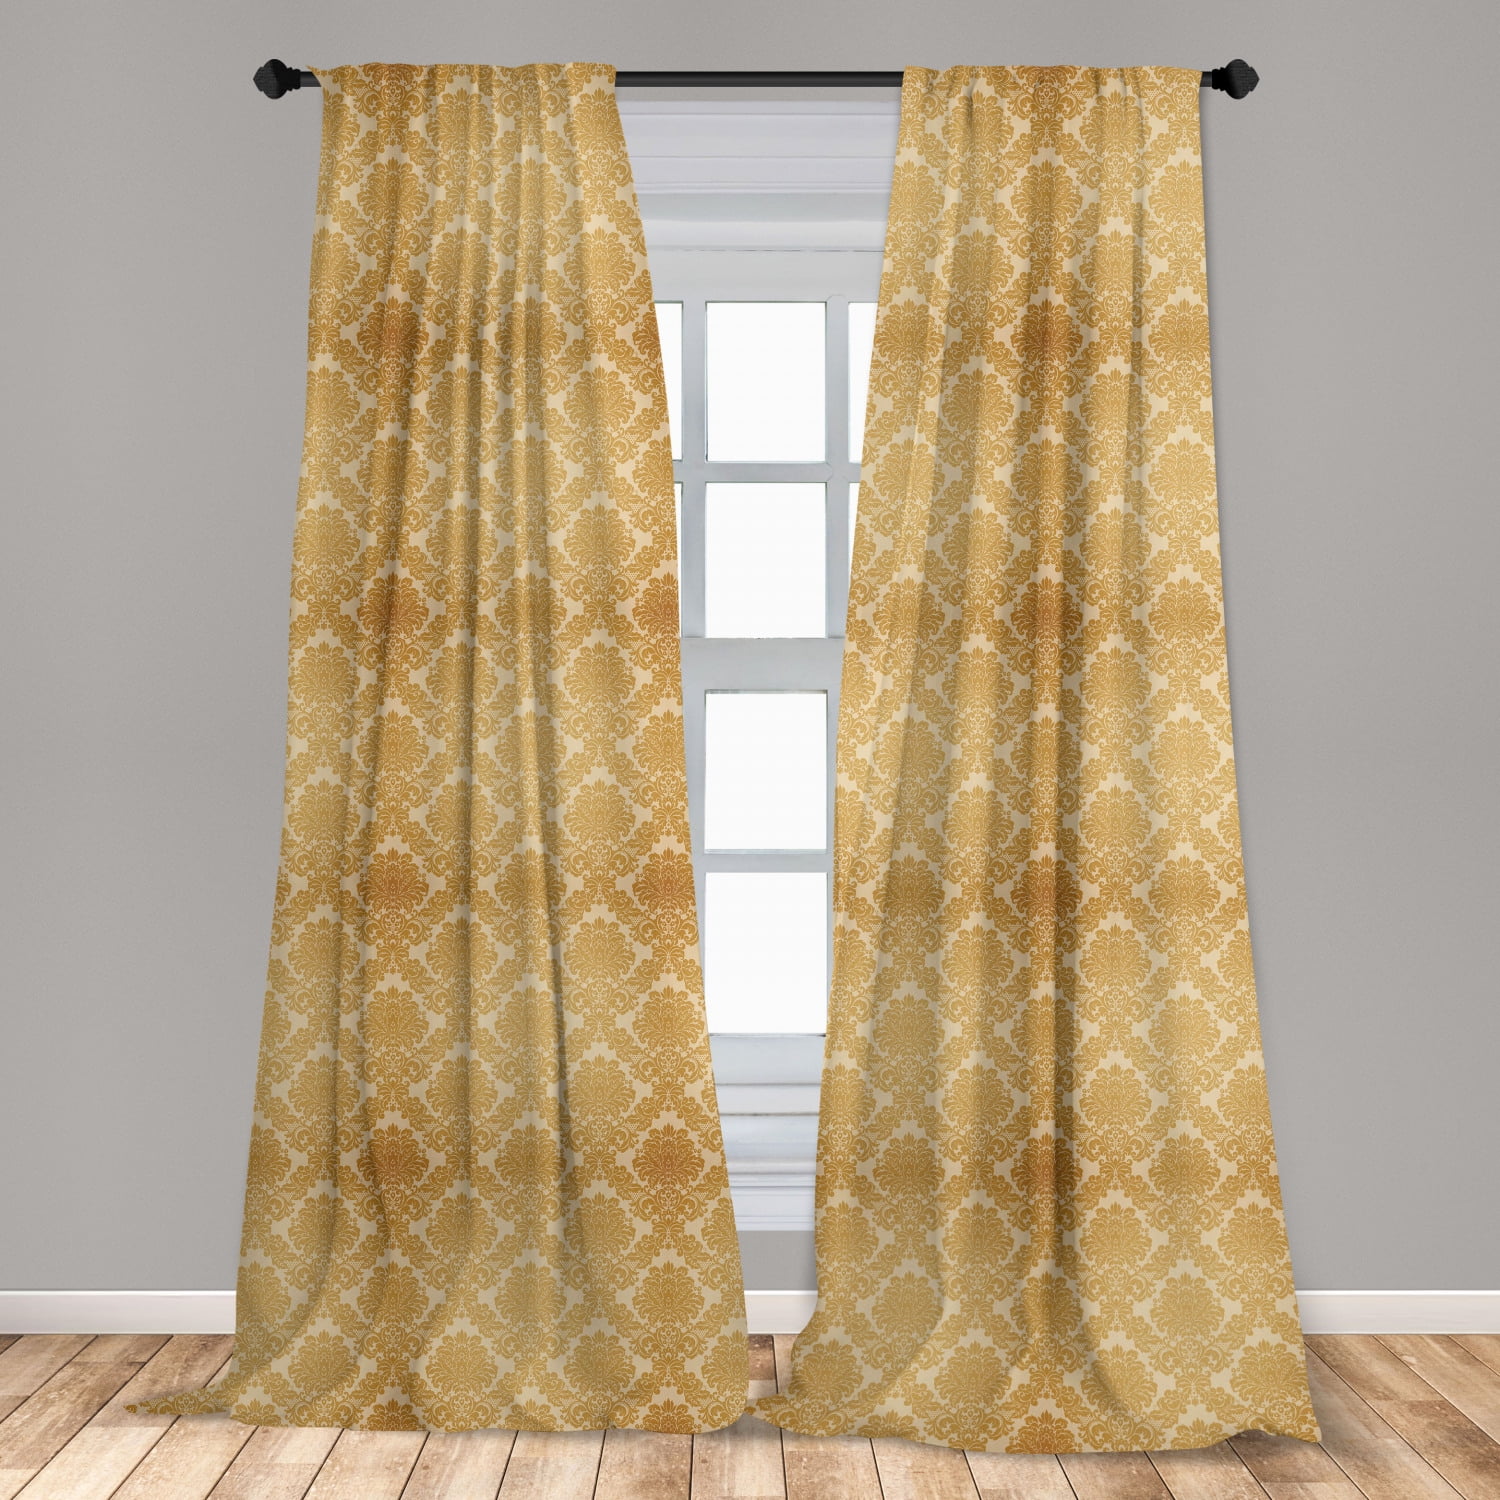 Photo Curtain Lily Faces Curtain Digital Print Sliding Curtain with Motif to measure 